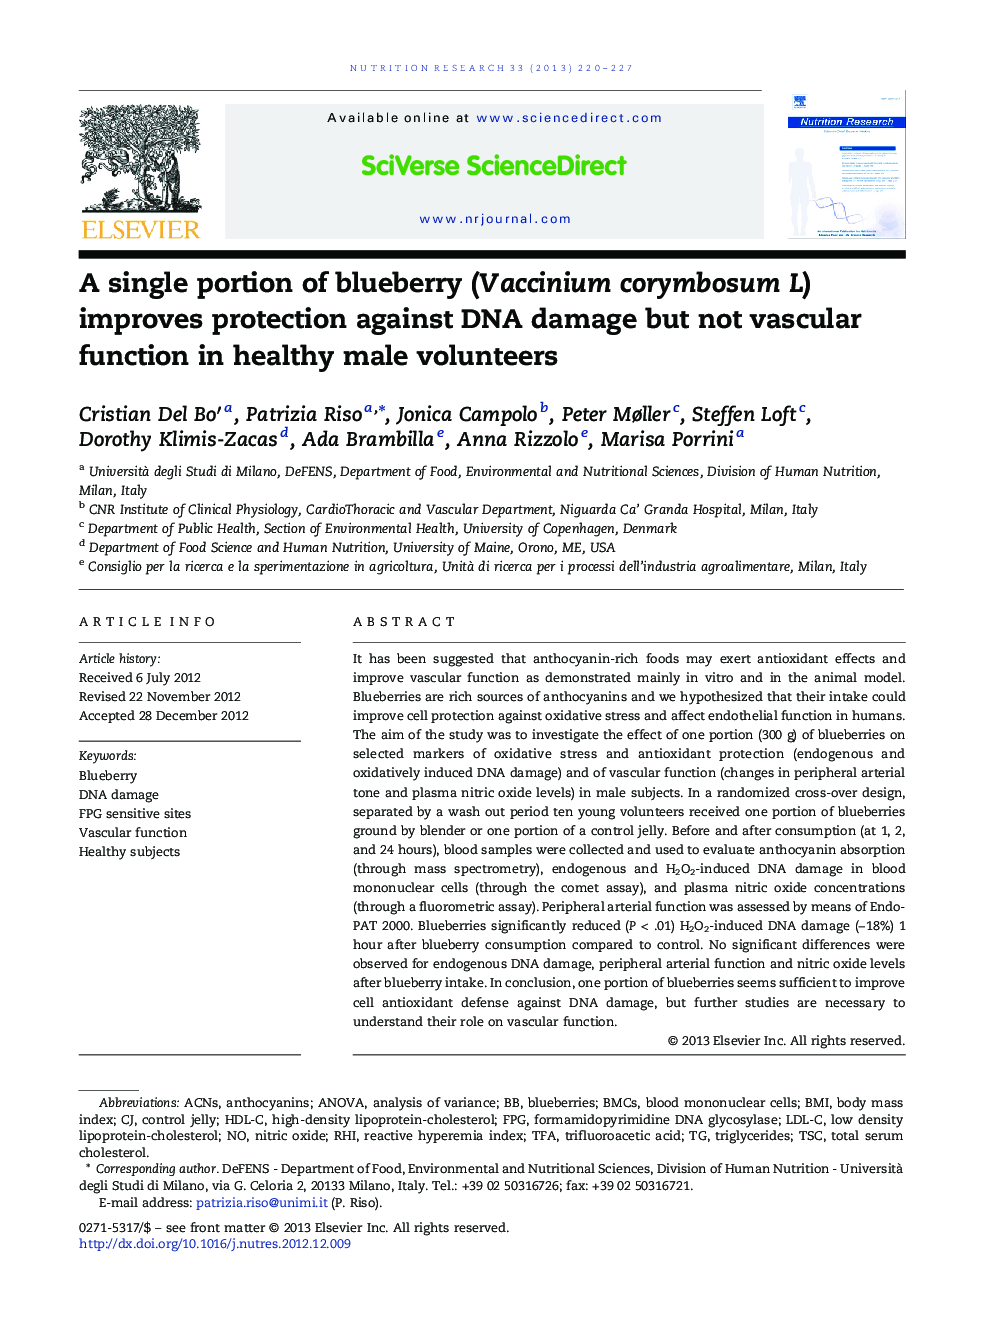 A single portion of blueberry (Vaccinium corymbosum L) improves protection against DNA damage but not vascular function in healthy male volunteers